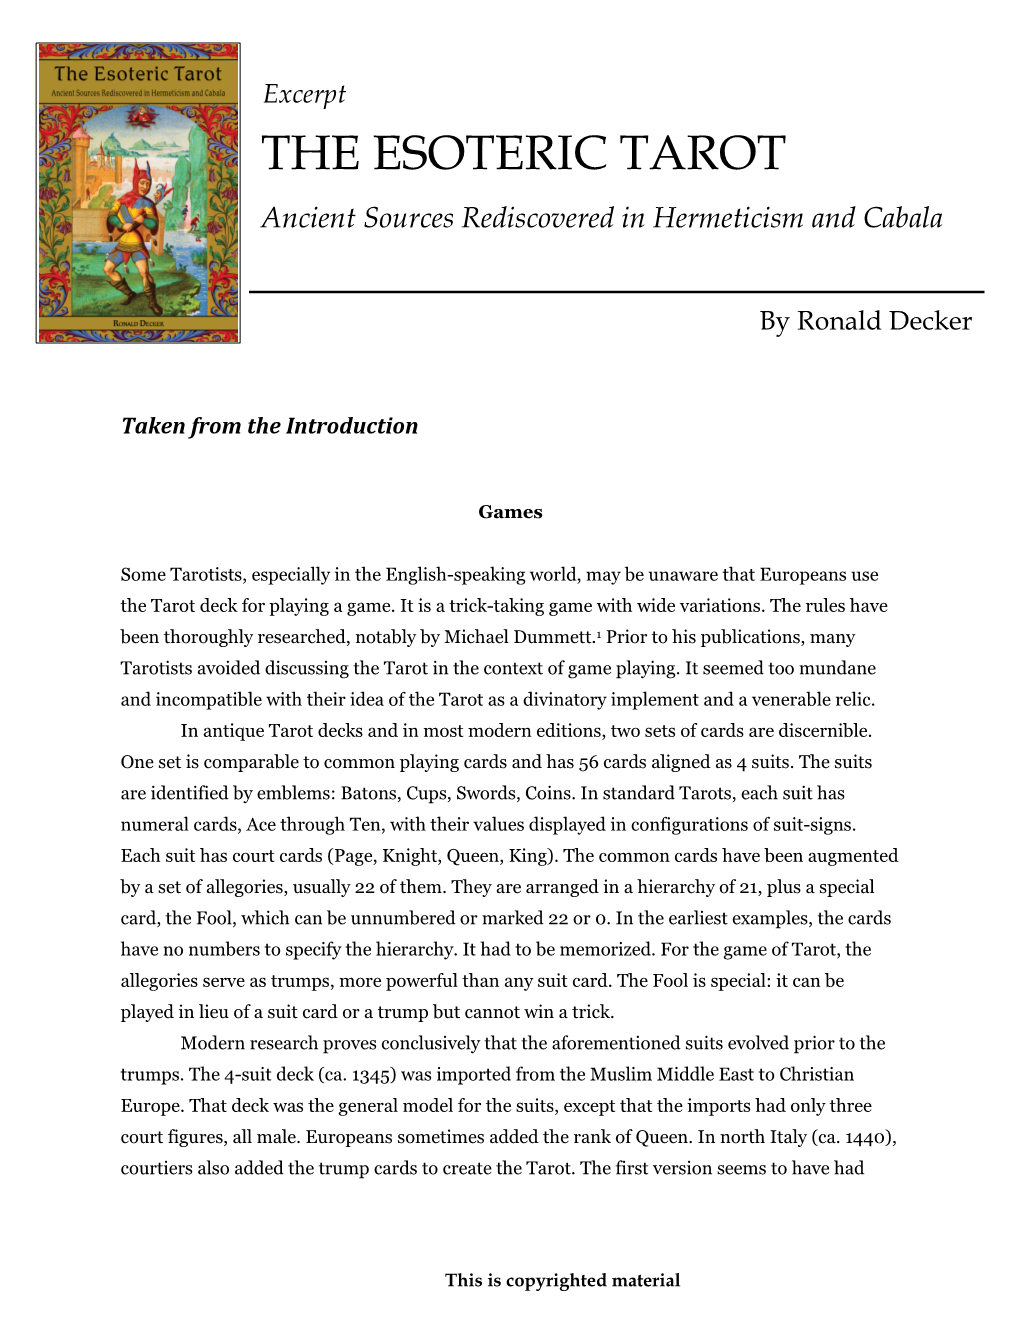 THE ESOTERIC TAROT Ancient Sources Rediscovered in Hermeticism and Cabala